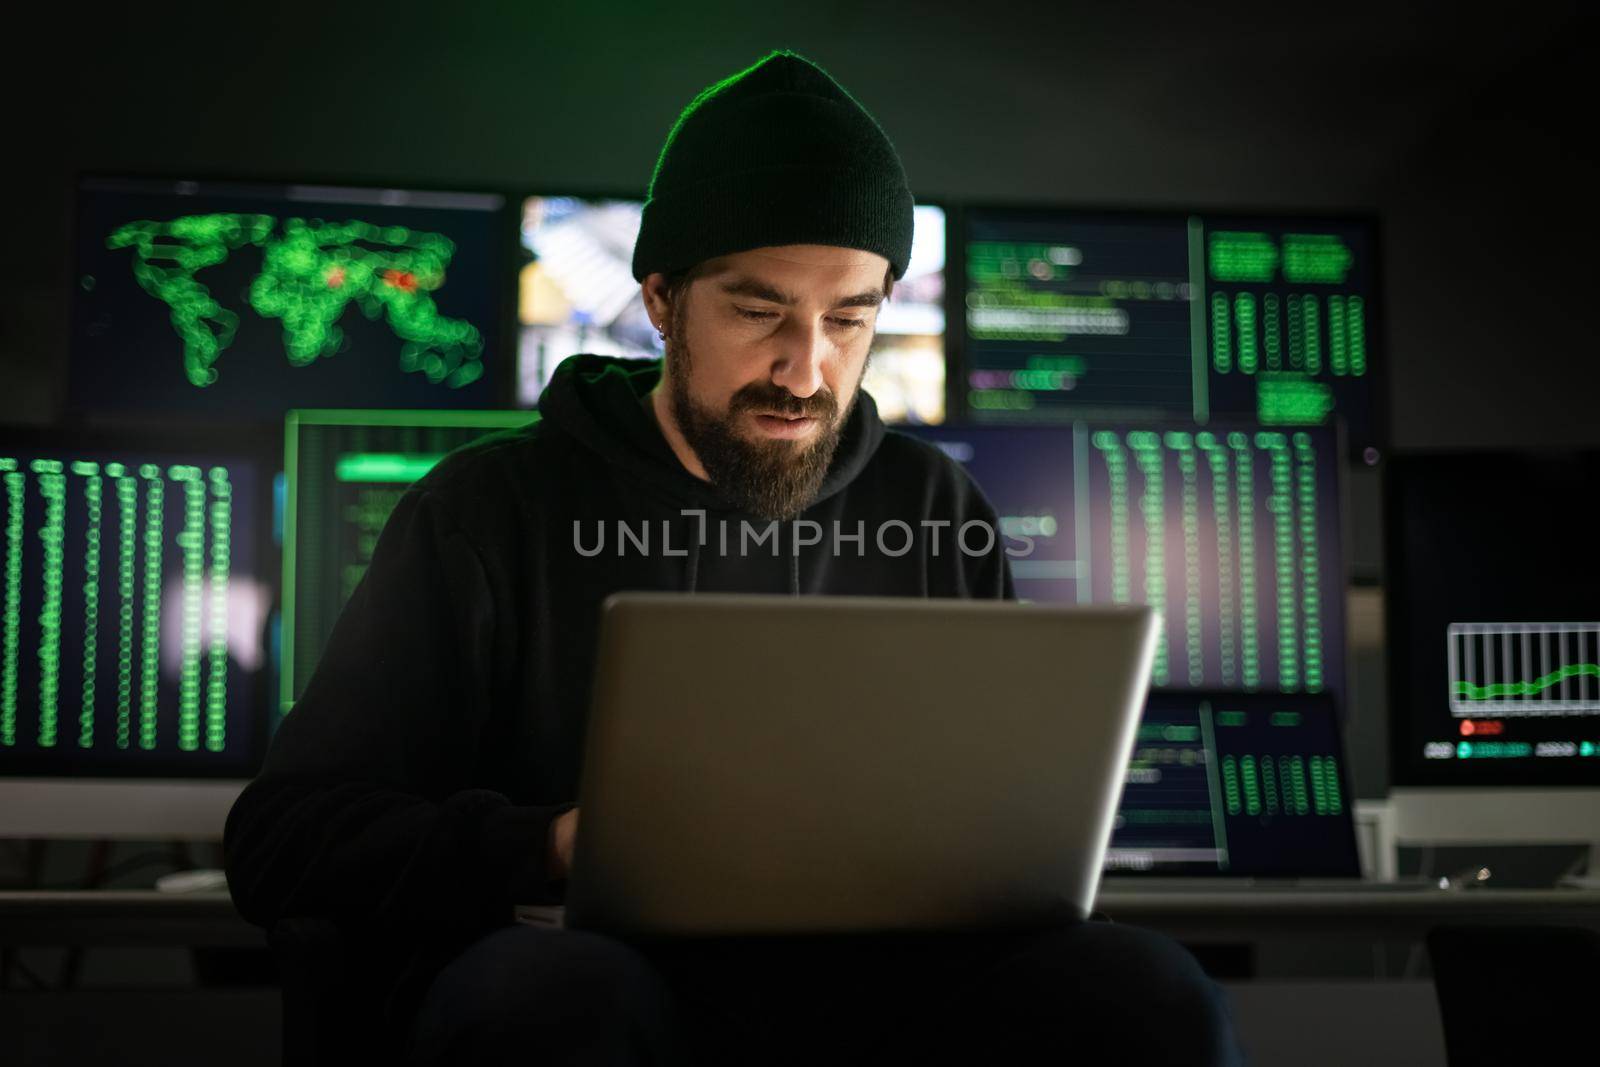 Caucasian male hacker using laptop to organize malware attack on global scale. Hacking concept.